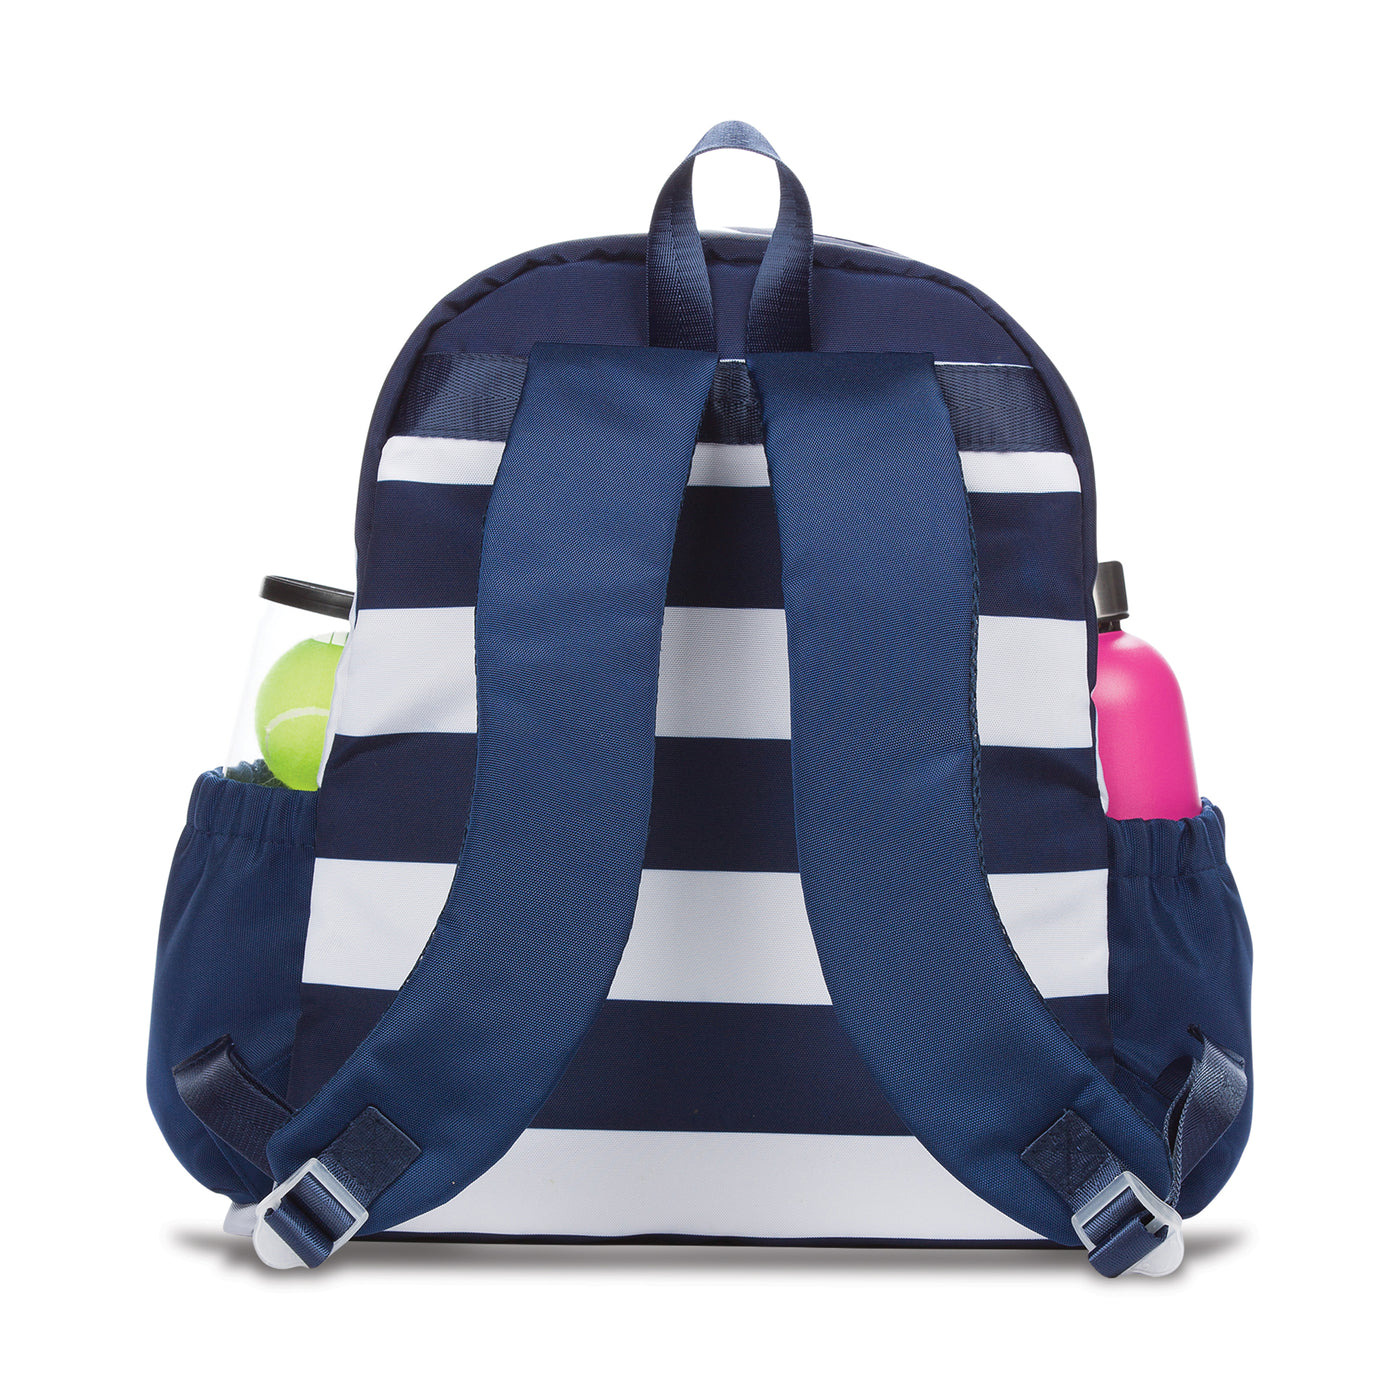 Back view of navy and white striped tennis backpack, with a water bottle and tennis balls in the side pockets.